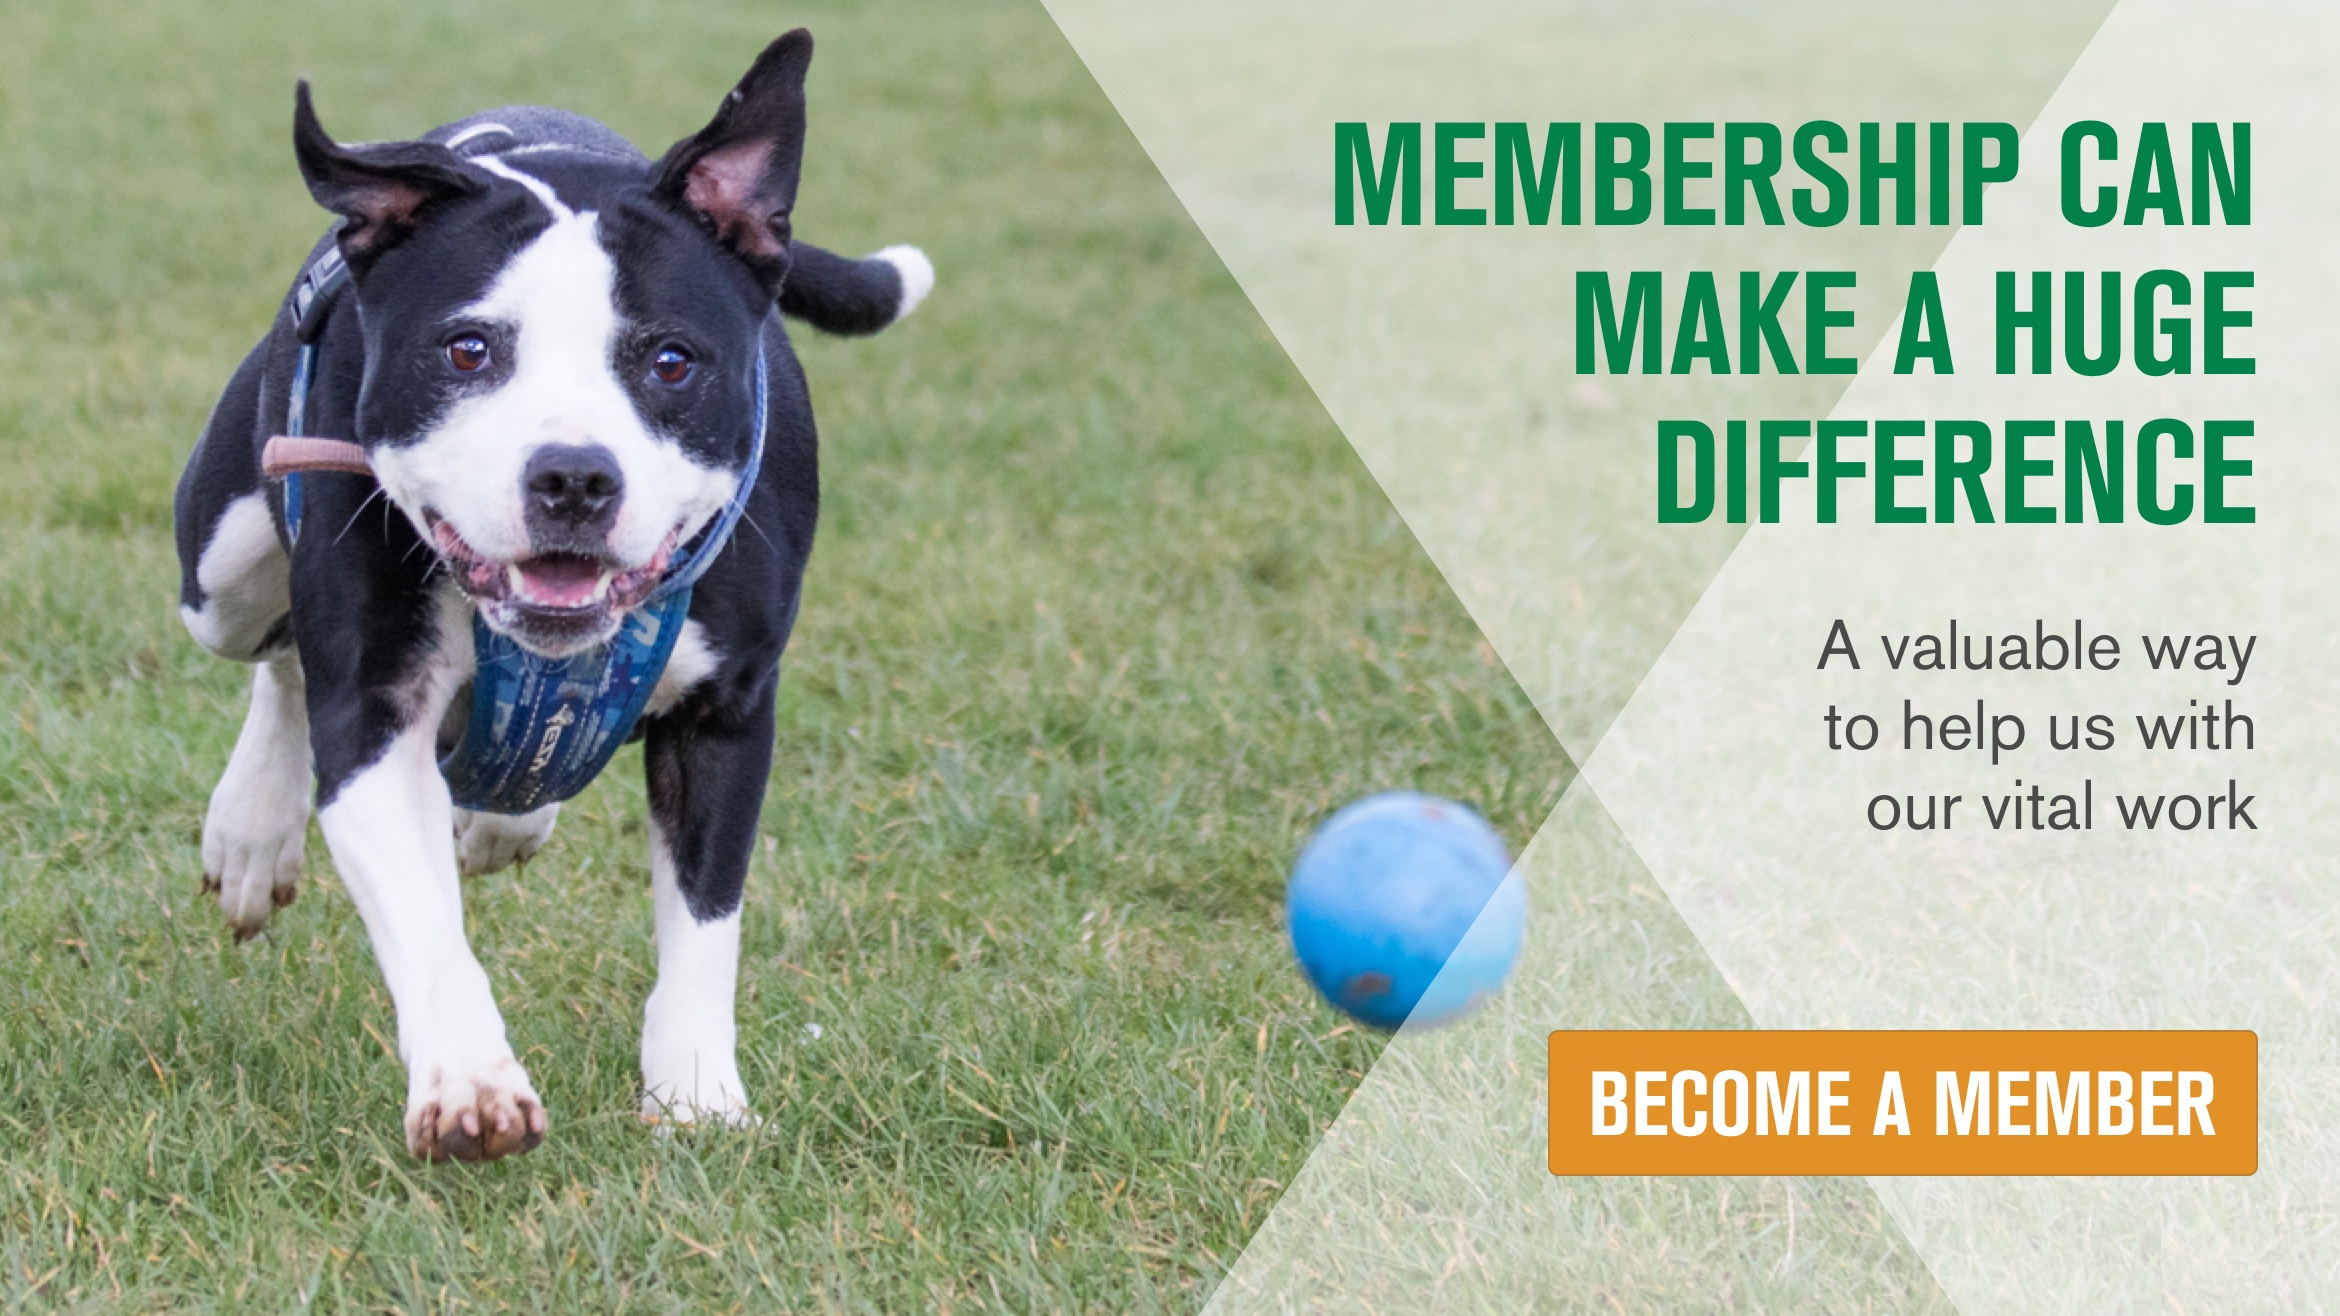 See the huge number of ways your membership could make a difference